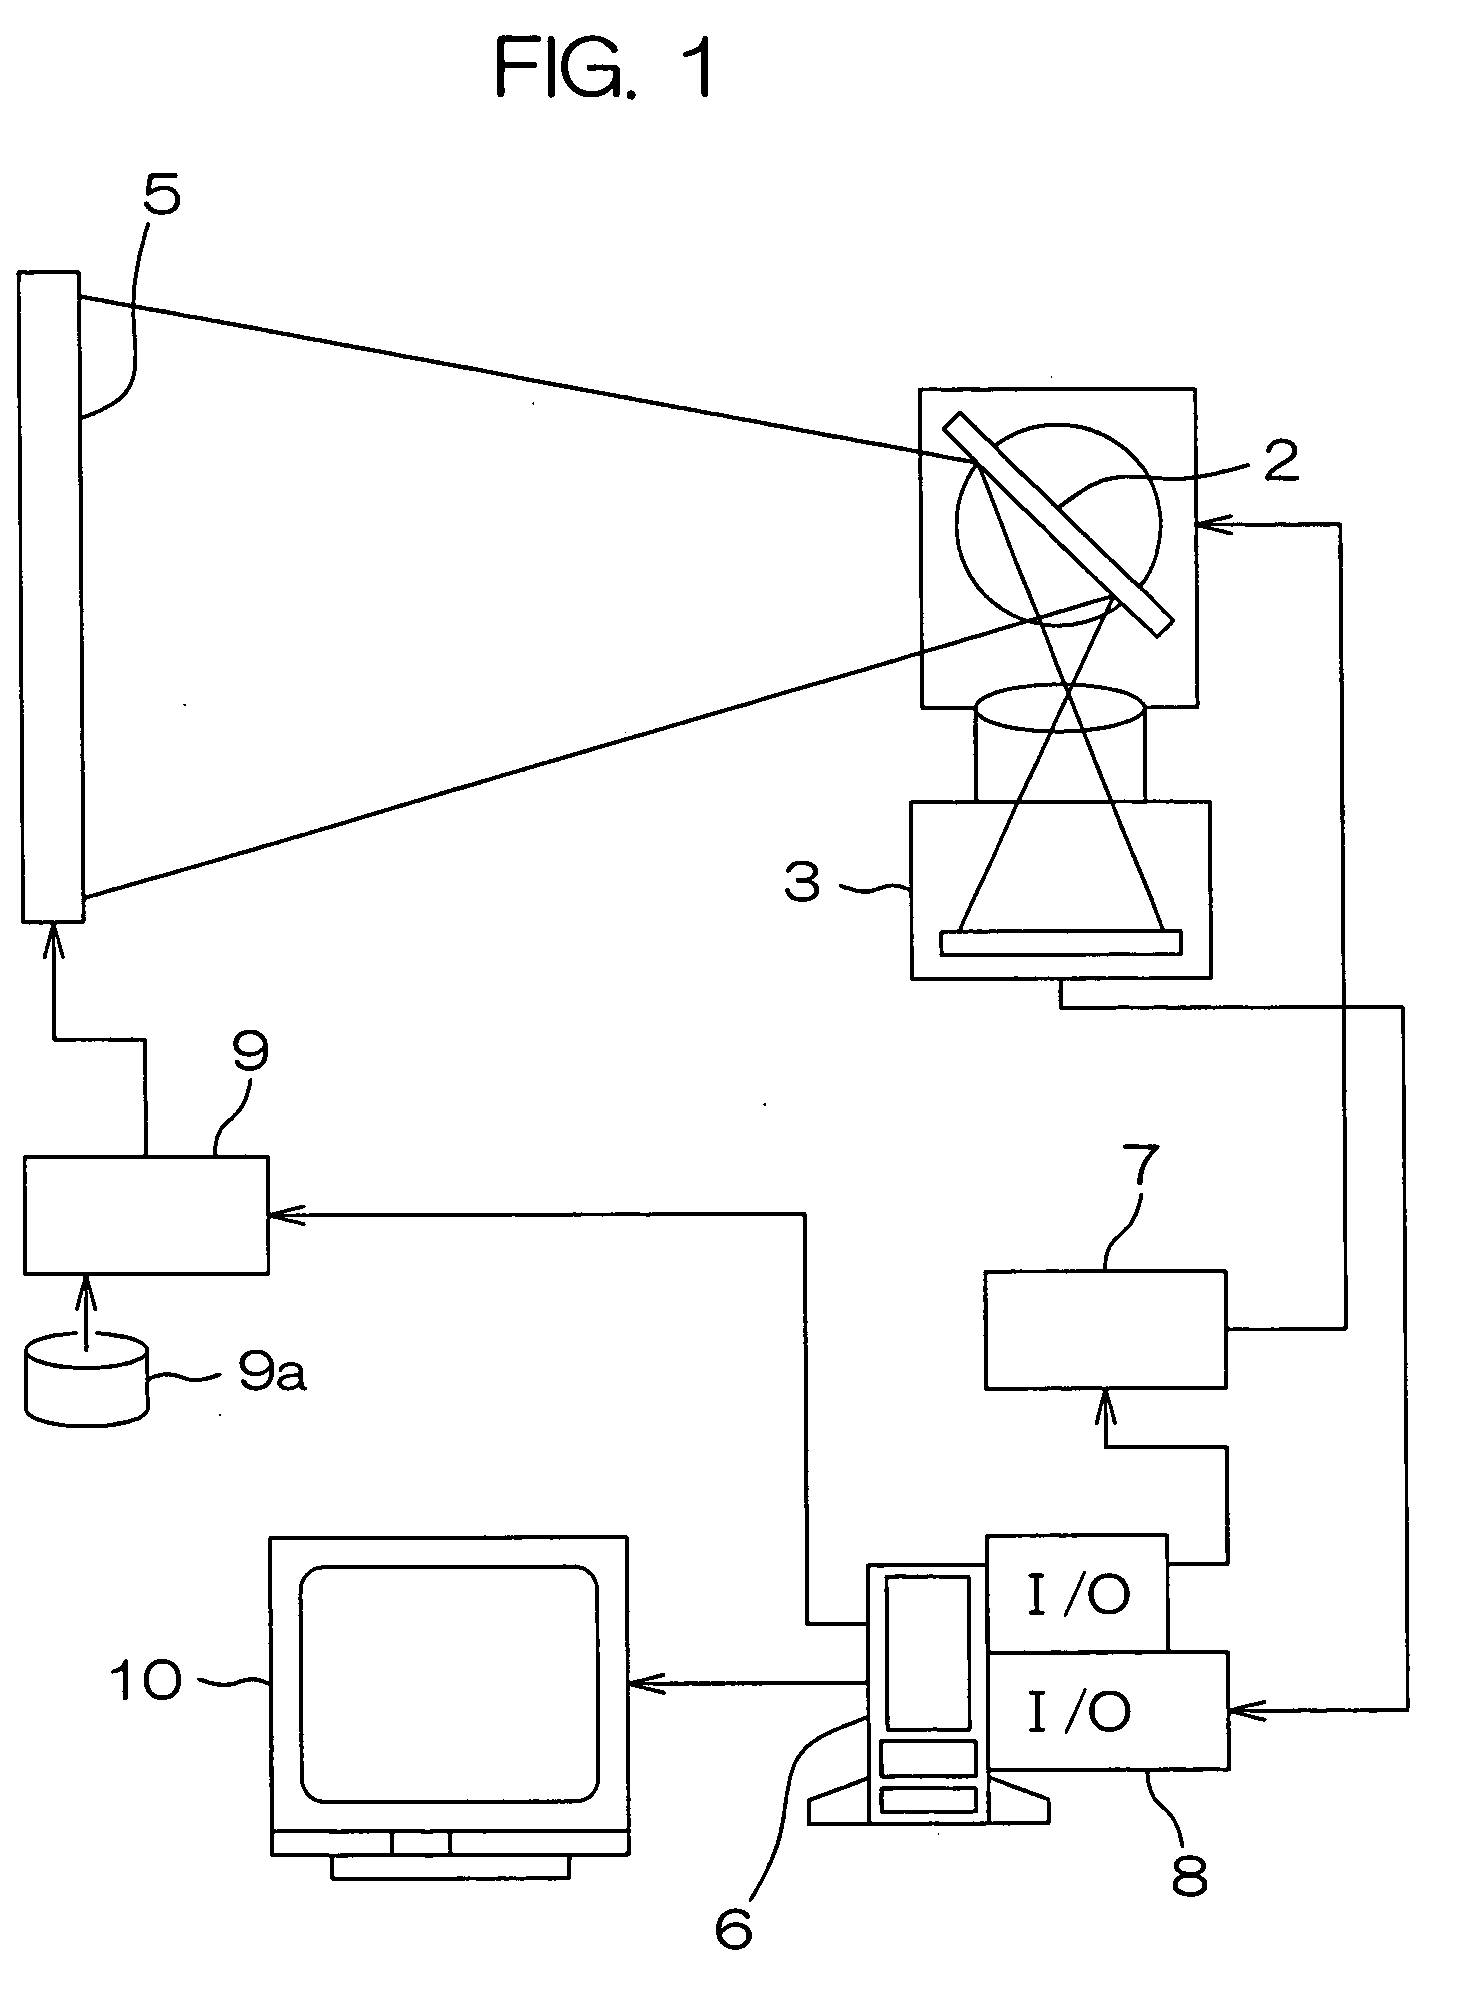 System and method for measuring/evaluating moving image quality of screen